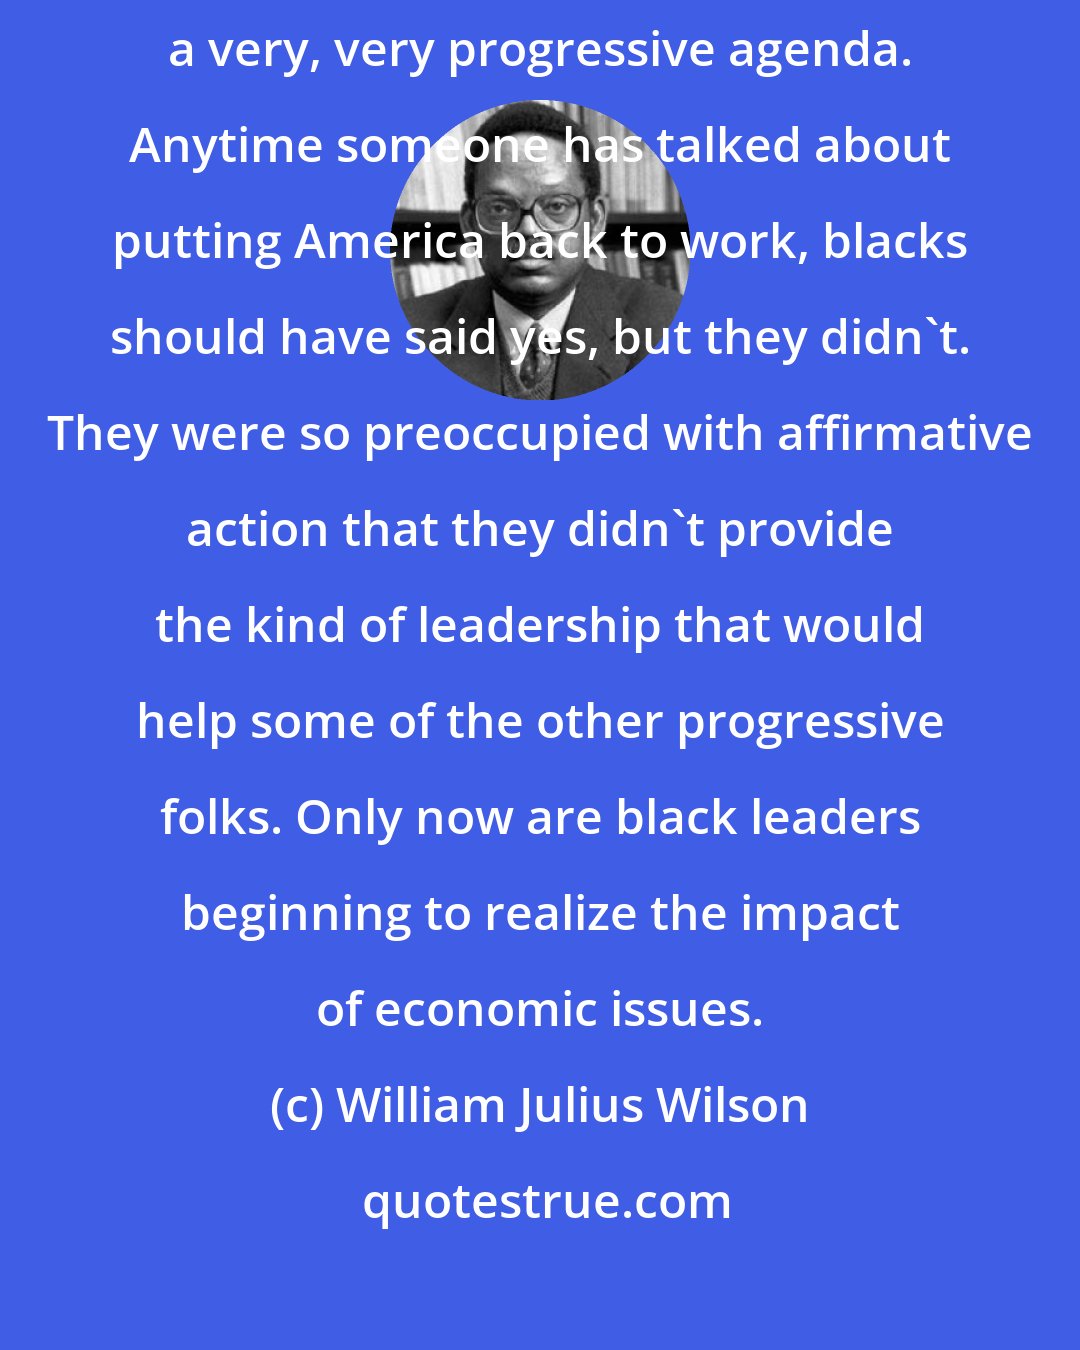 William Julius Wilson: Over the years, black leaders have been slow to recognize the need for a very, very progressive agenda. Anytime someone has talked about putting America back to work, blacks should have said yes, but they didn't. They were so preoccupied with affirmative action that they didn't provide the kind of leadership that would help some of the other progressive folks. Only now are black leaders beginning to realize the impact of economic issues.